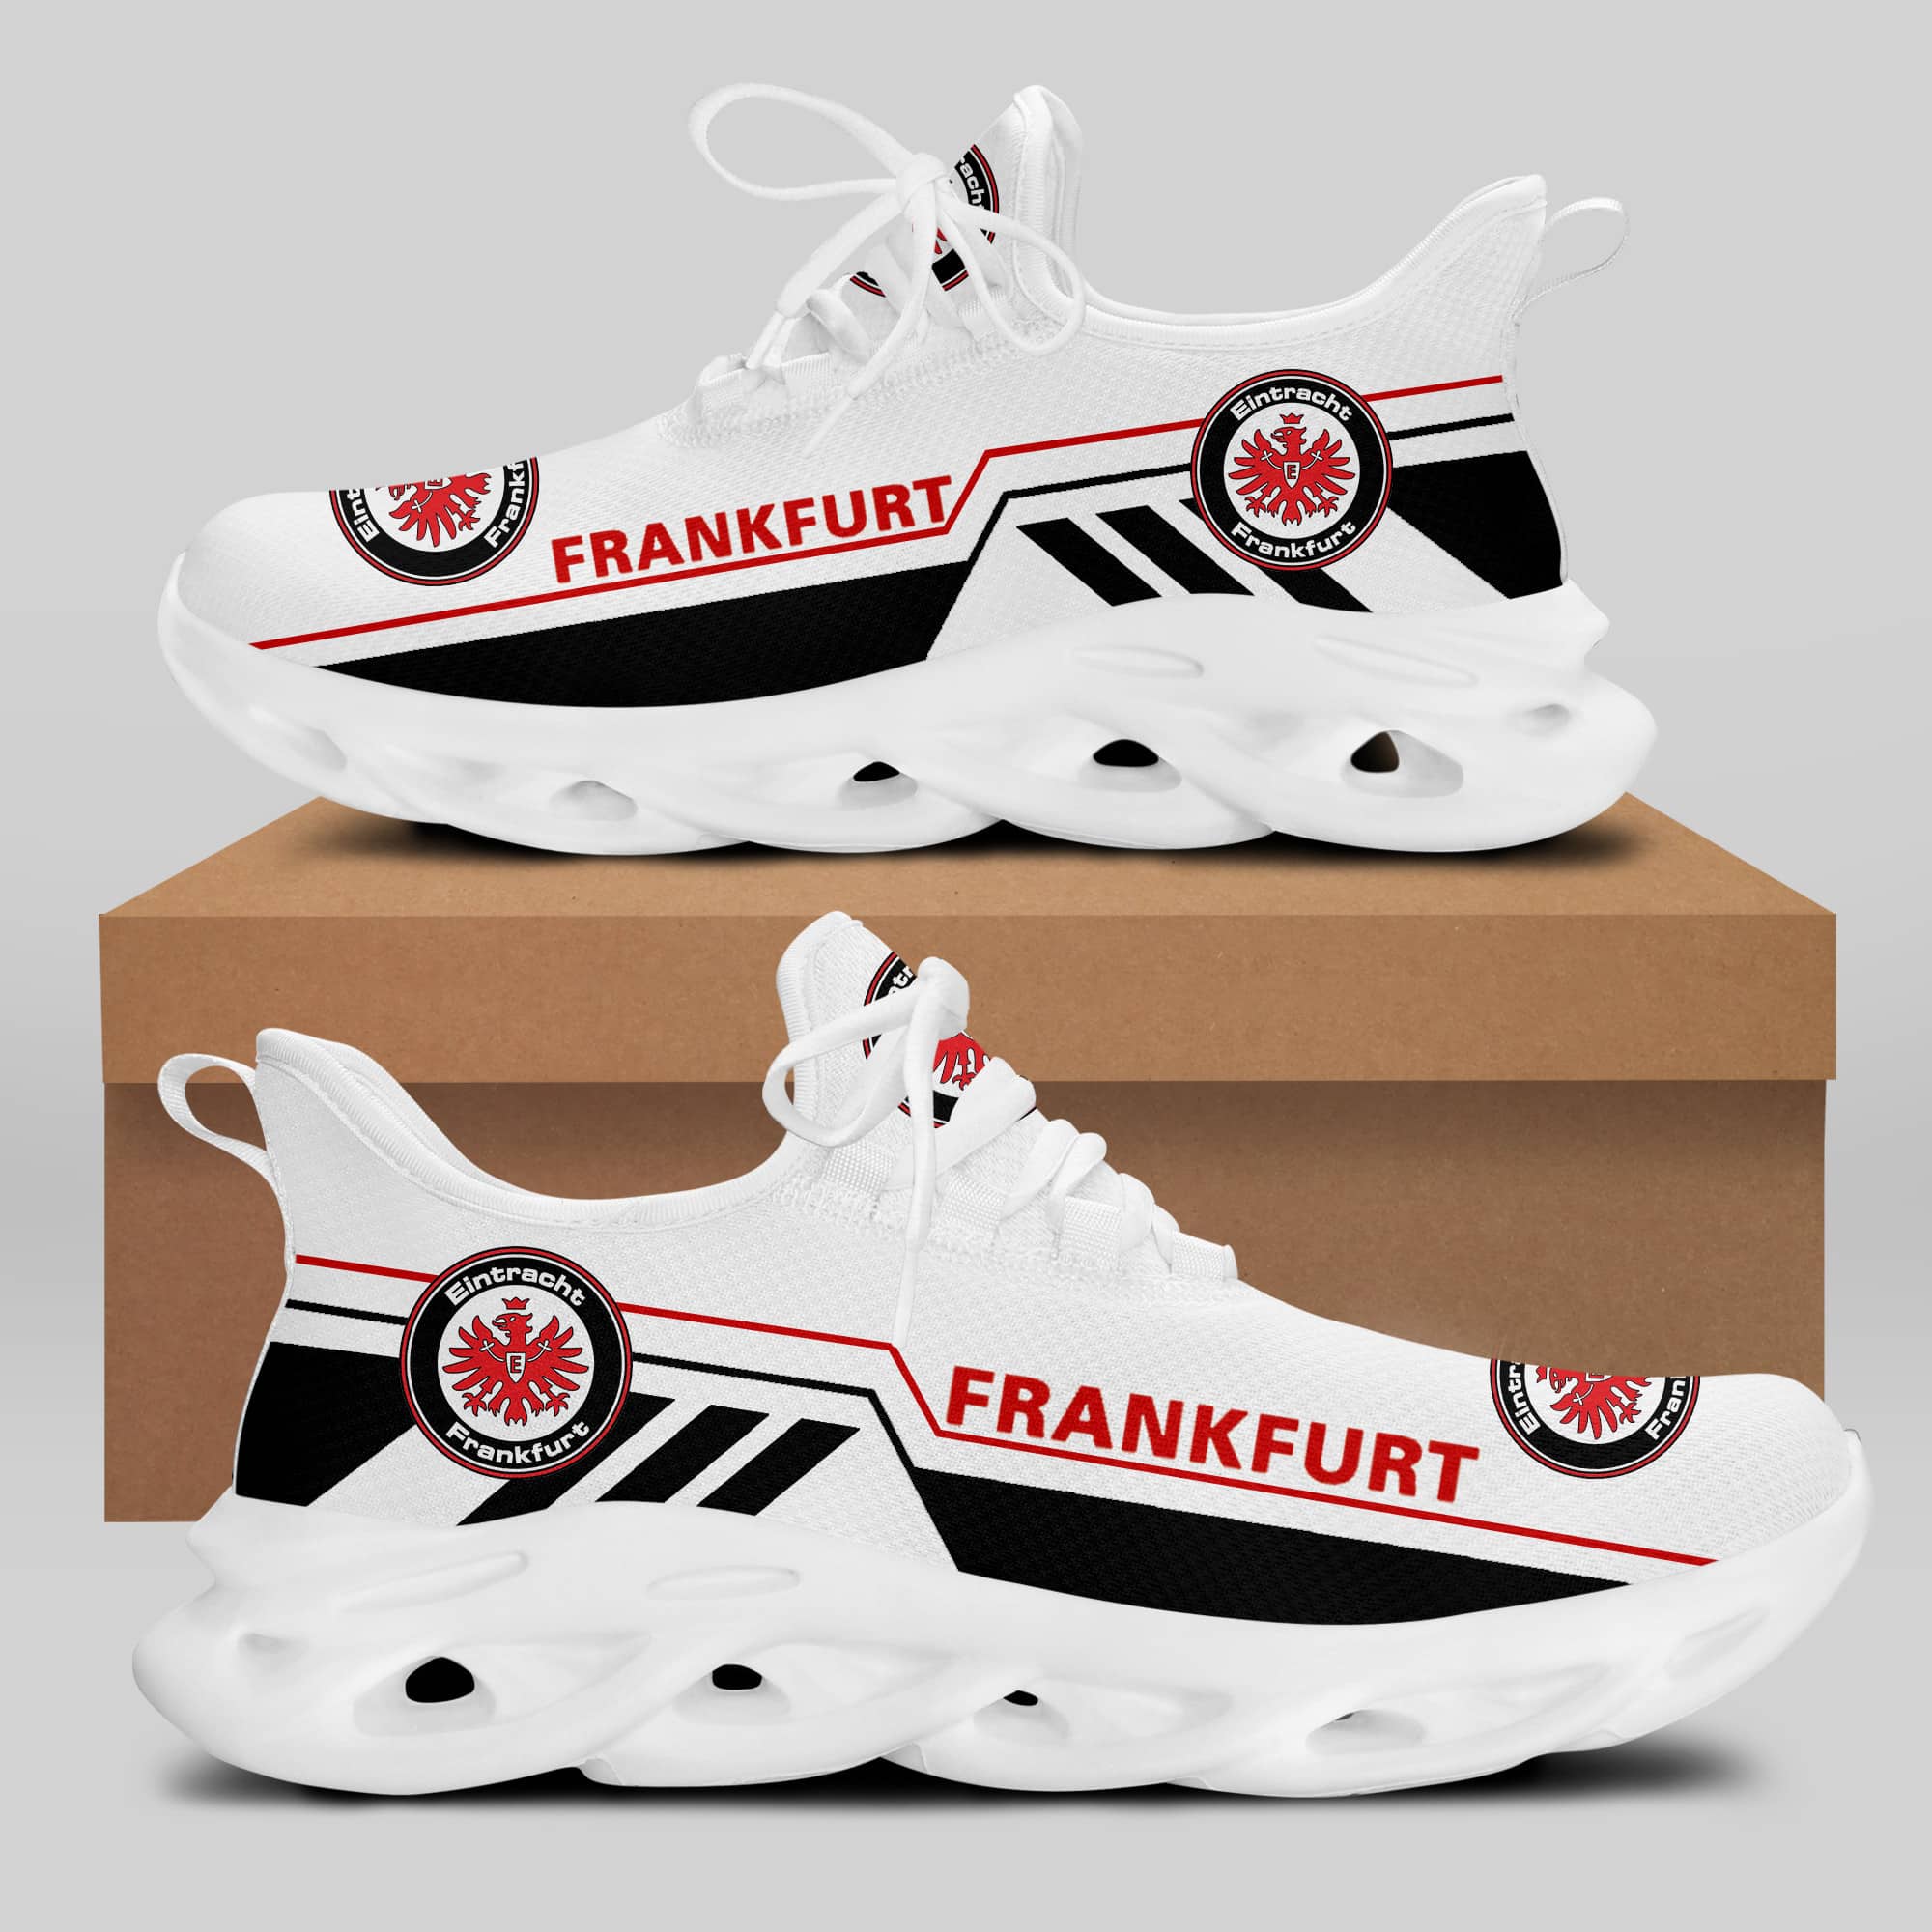 Eintracht Frankfurt Running Shoes Max Soul Shoes Sneakers Ver 16 1